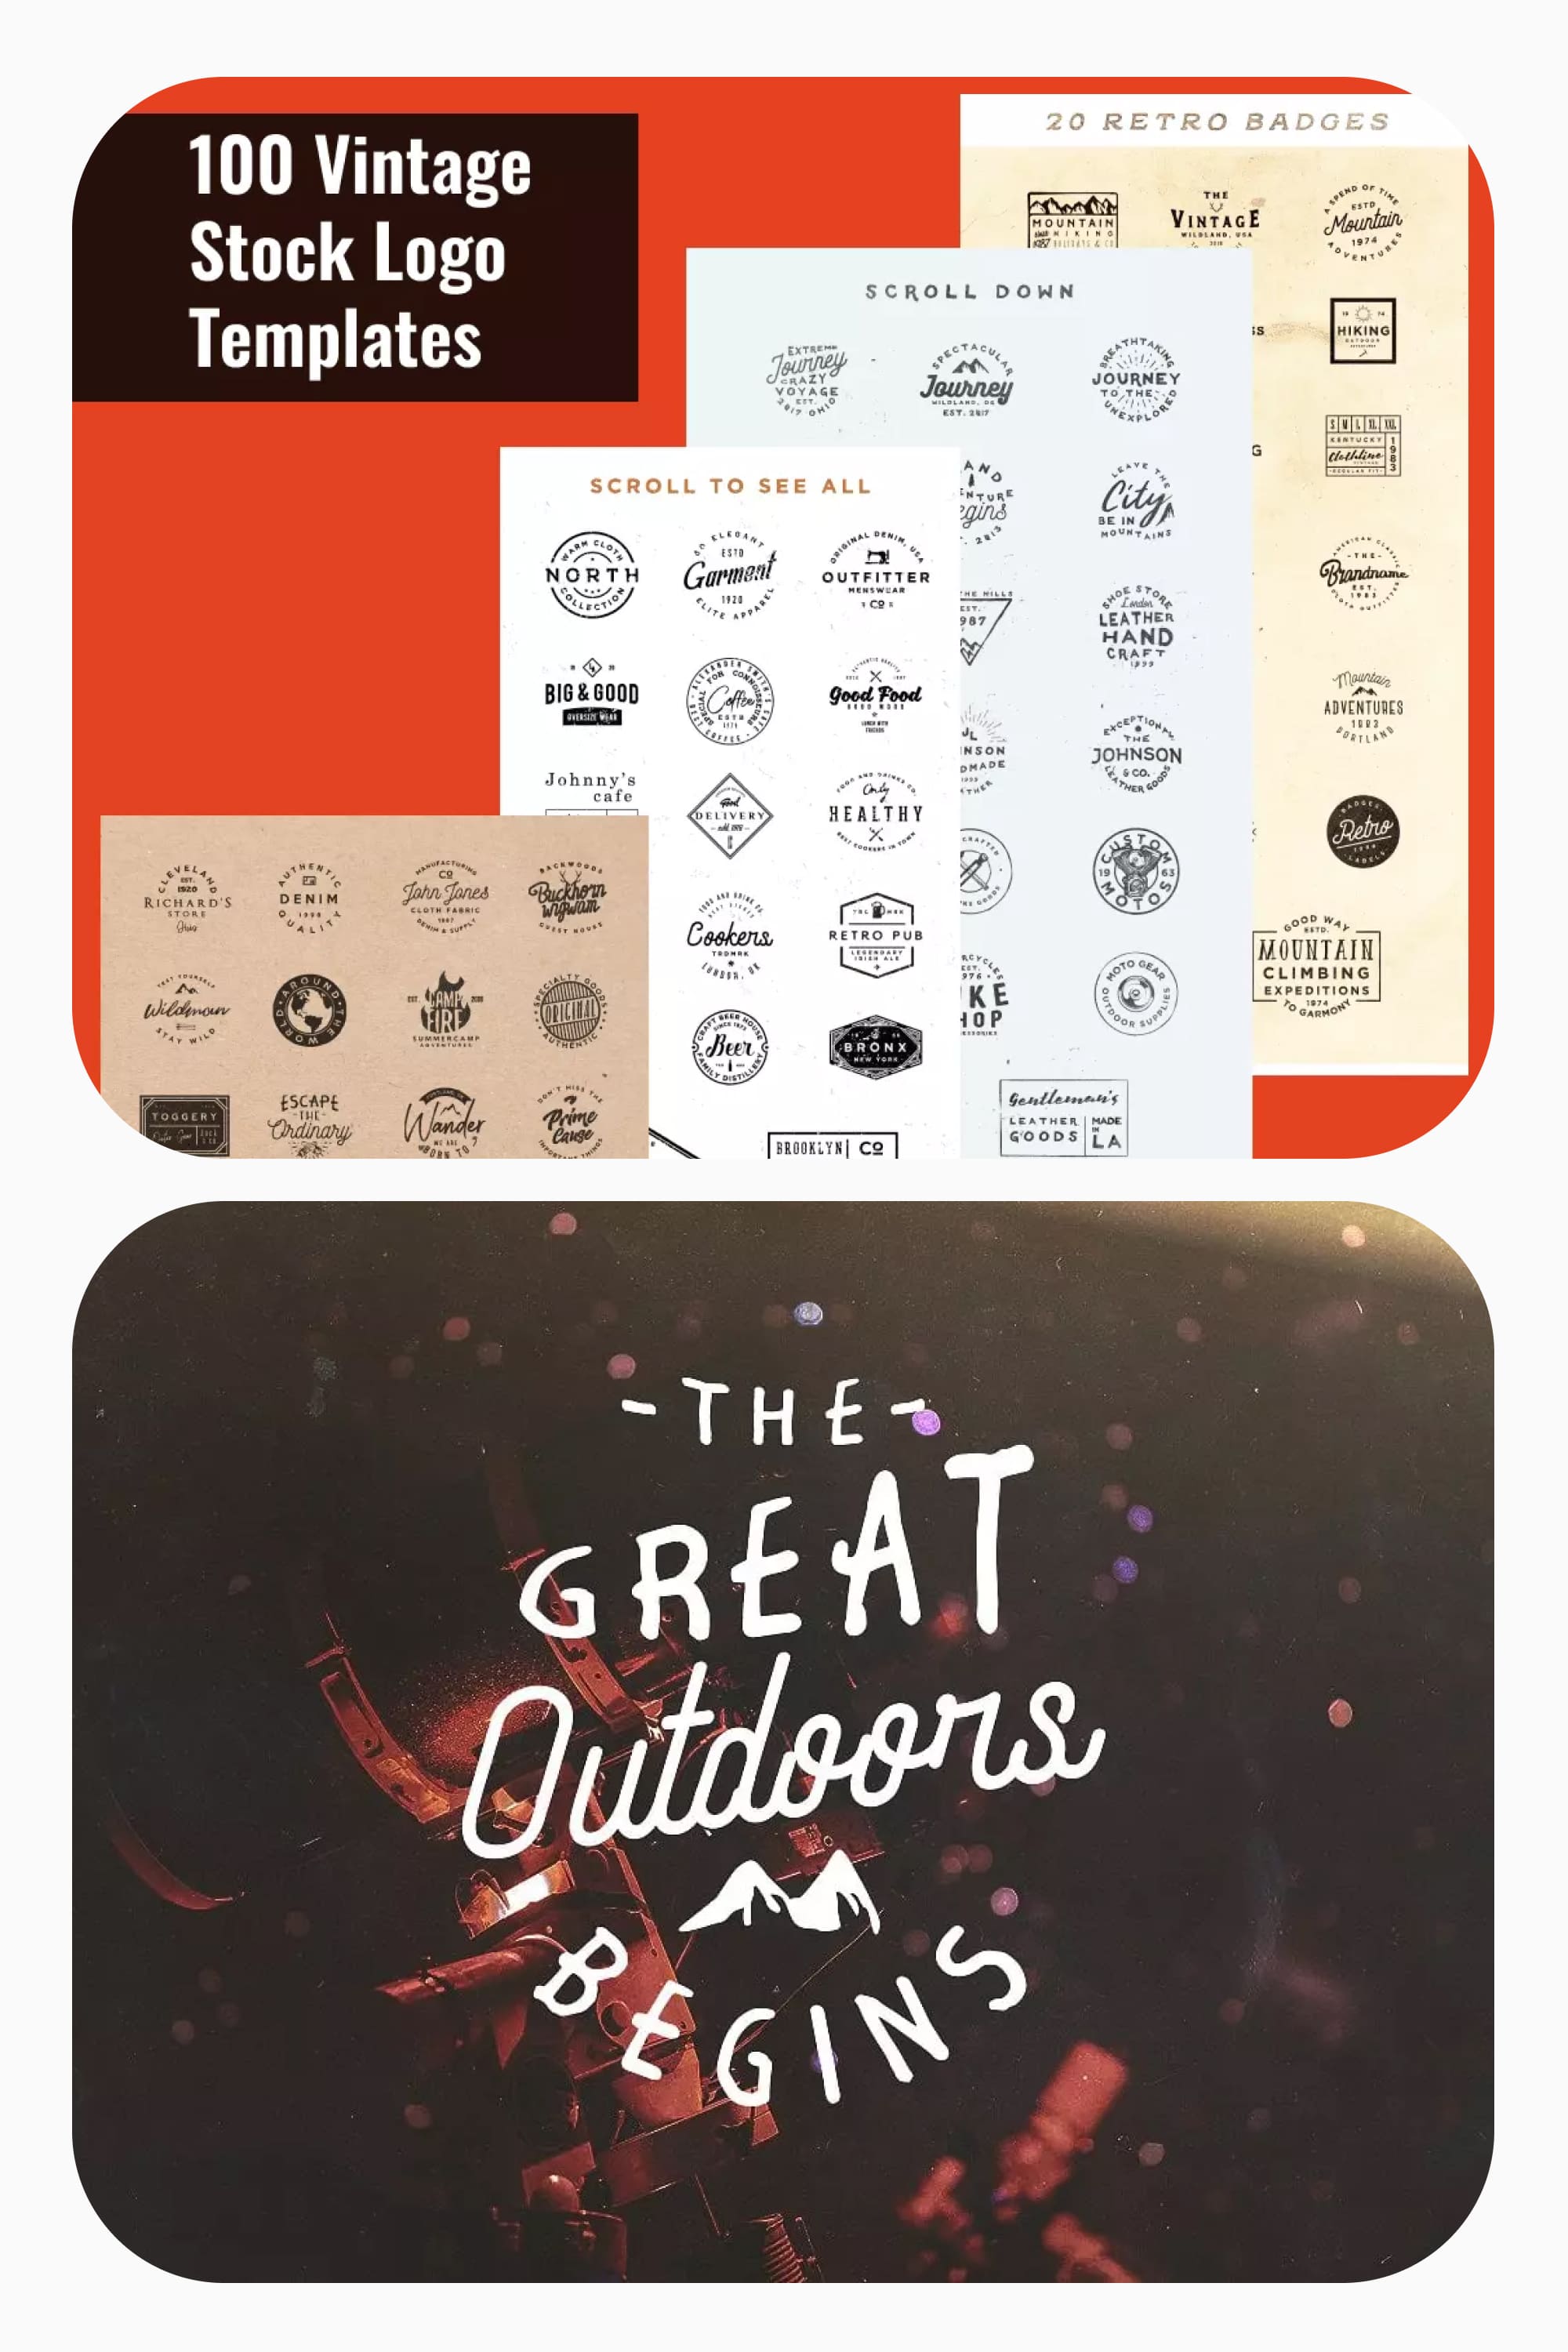 Collage of logos in vintage style.